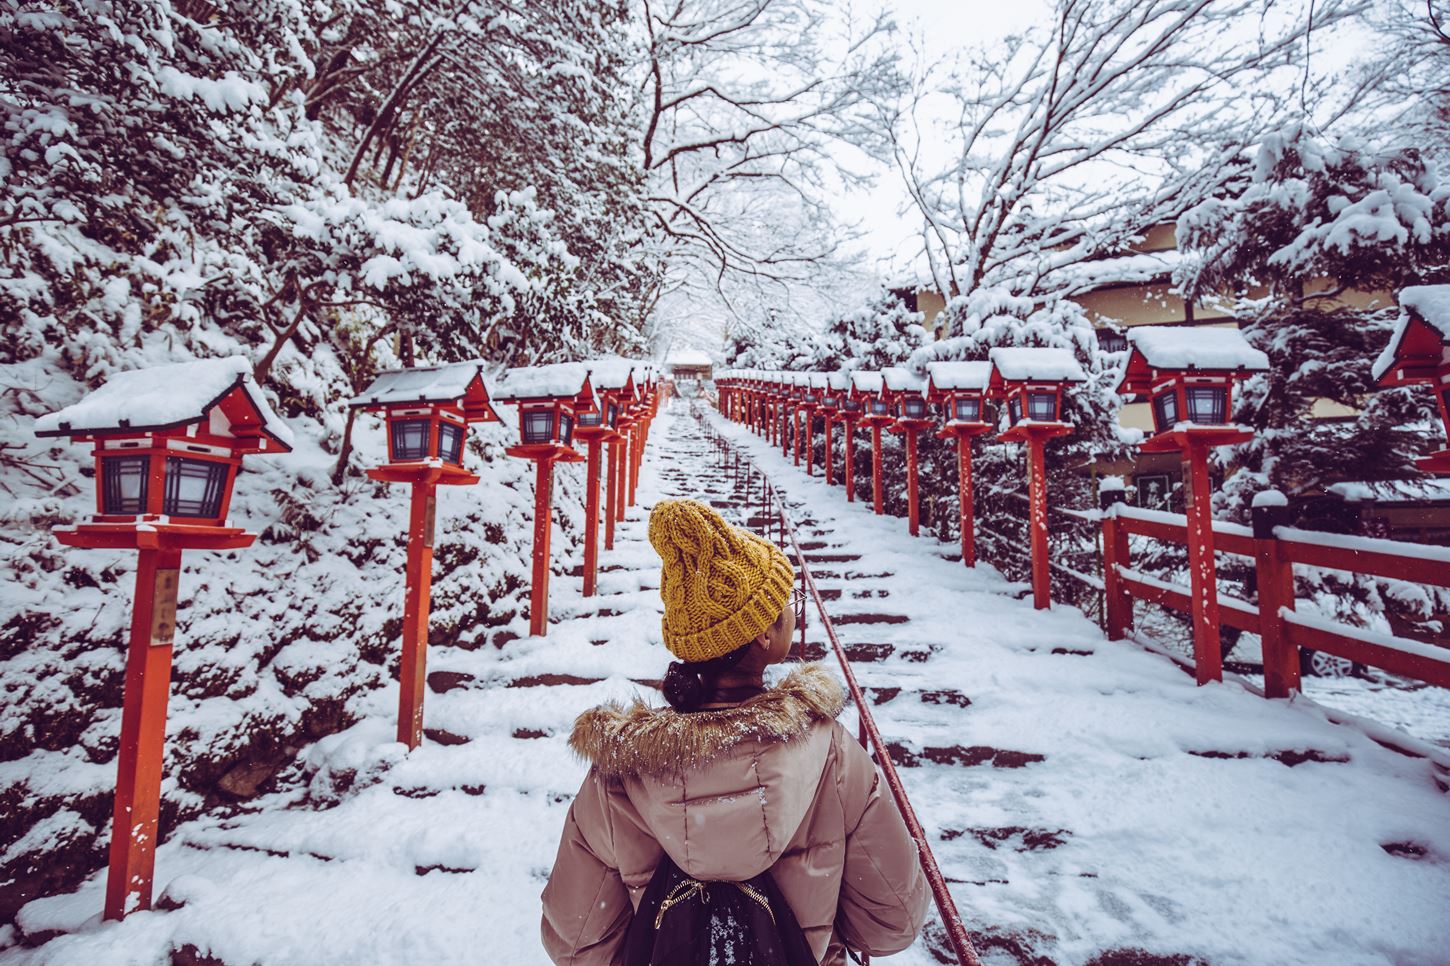 Sightseeing scenery that simply shows the weather in Kyoto in January4